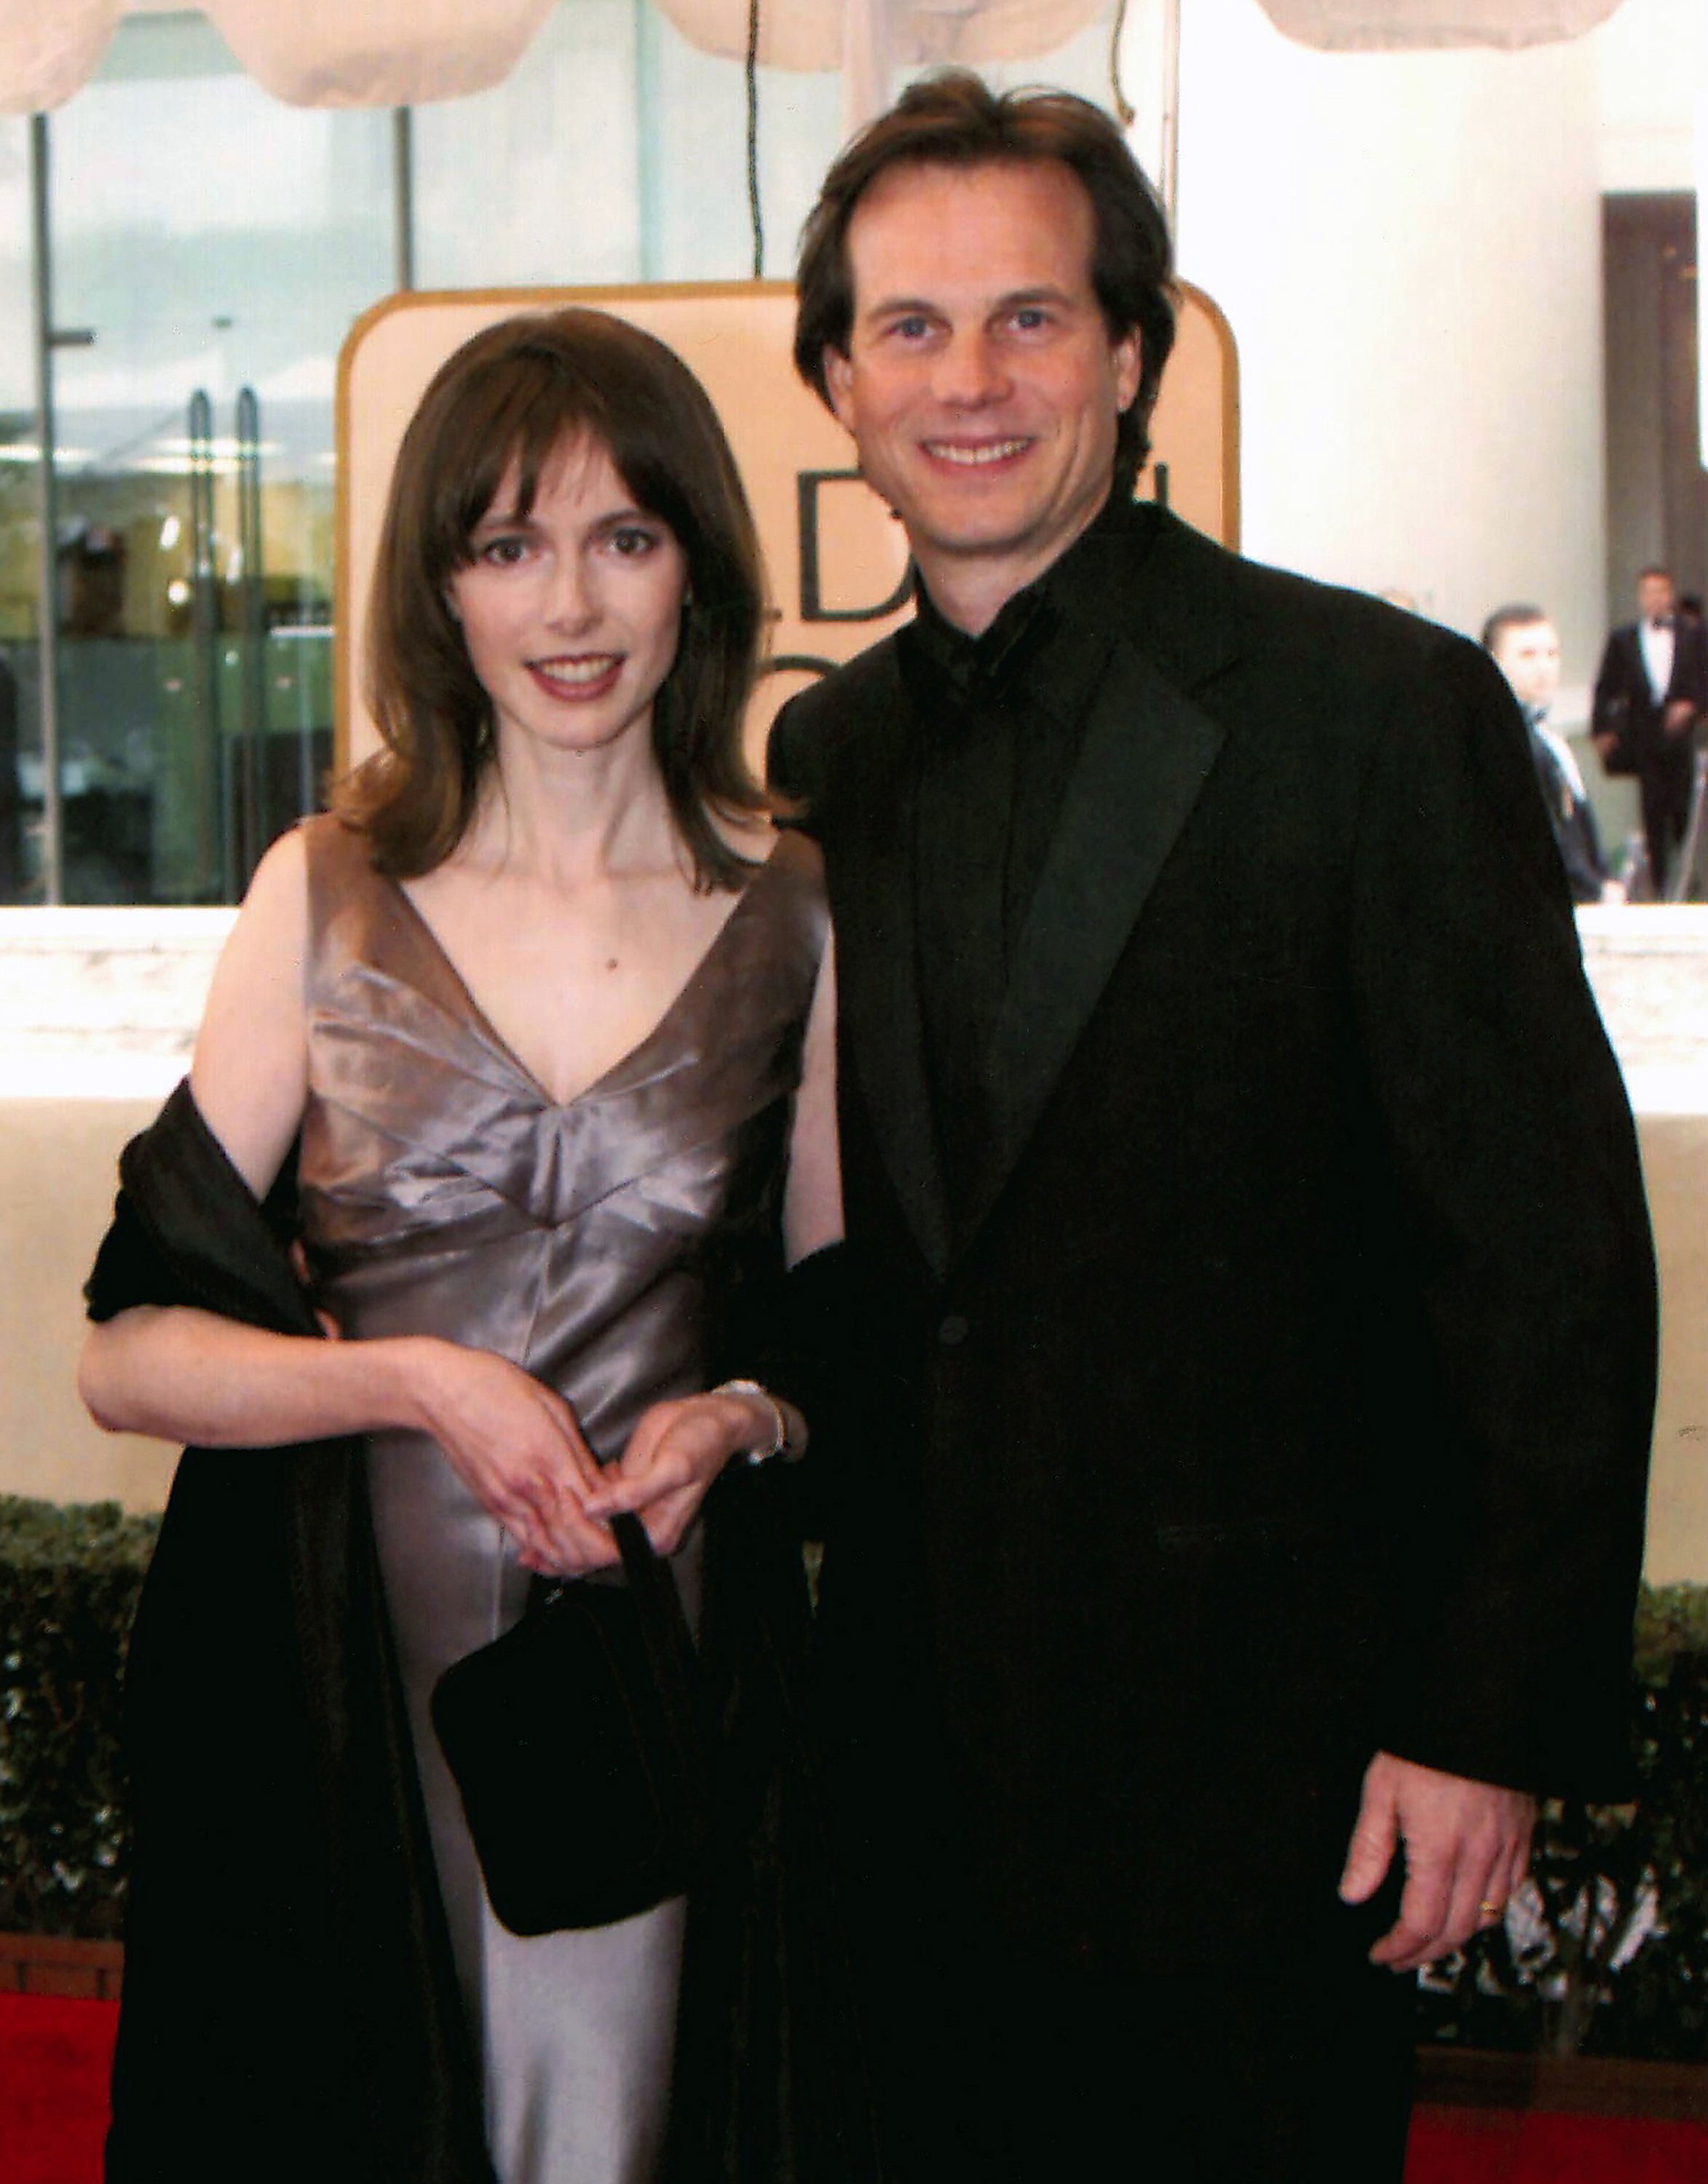 Bill Paxton and wife Louise at the Golden Globes Awards in1999, in Los Angeles, California. | Source: Getty Images